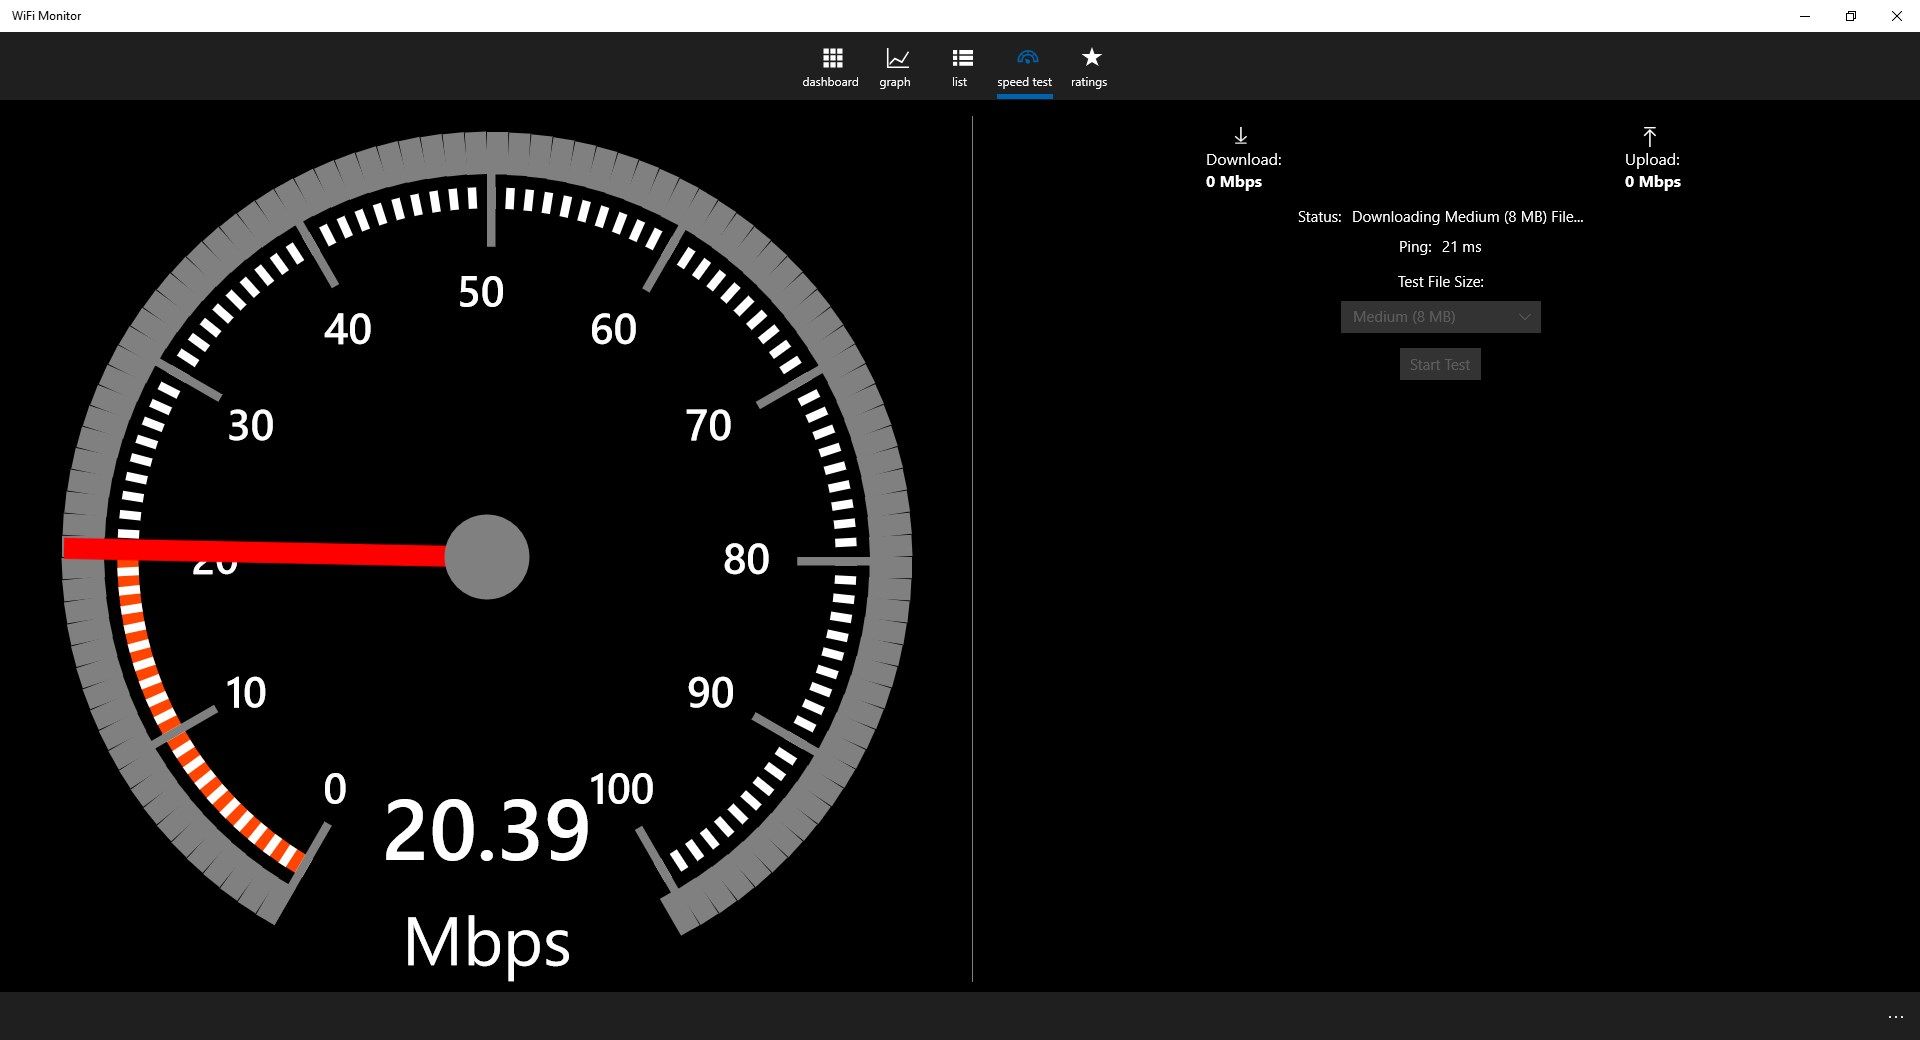 Run a download and upload speed test to determine your network speed. (Paid version only)